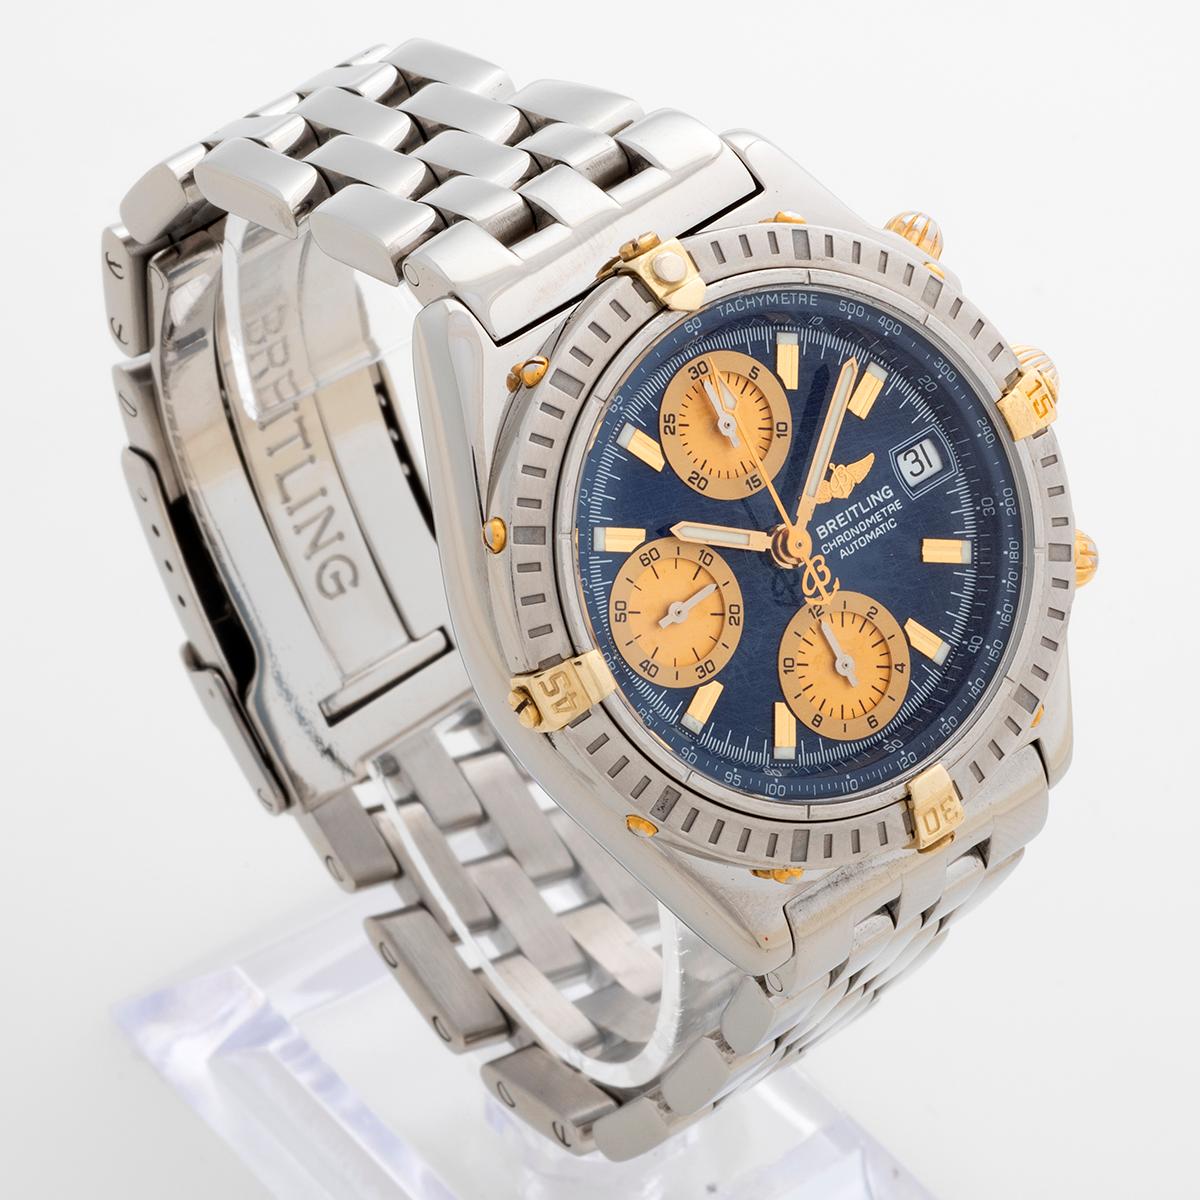 Our Breitling chronomat chronograph reference B1335211 features a 39mm steel and yellow gold case with a rare blue dial and unusually with stainless steel bracelet with flip lock clasp. A complete set, presented in excellent condition, with lights